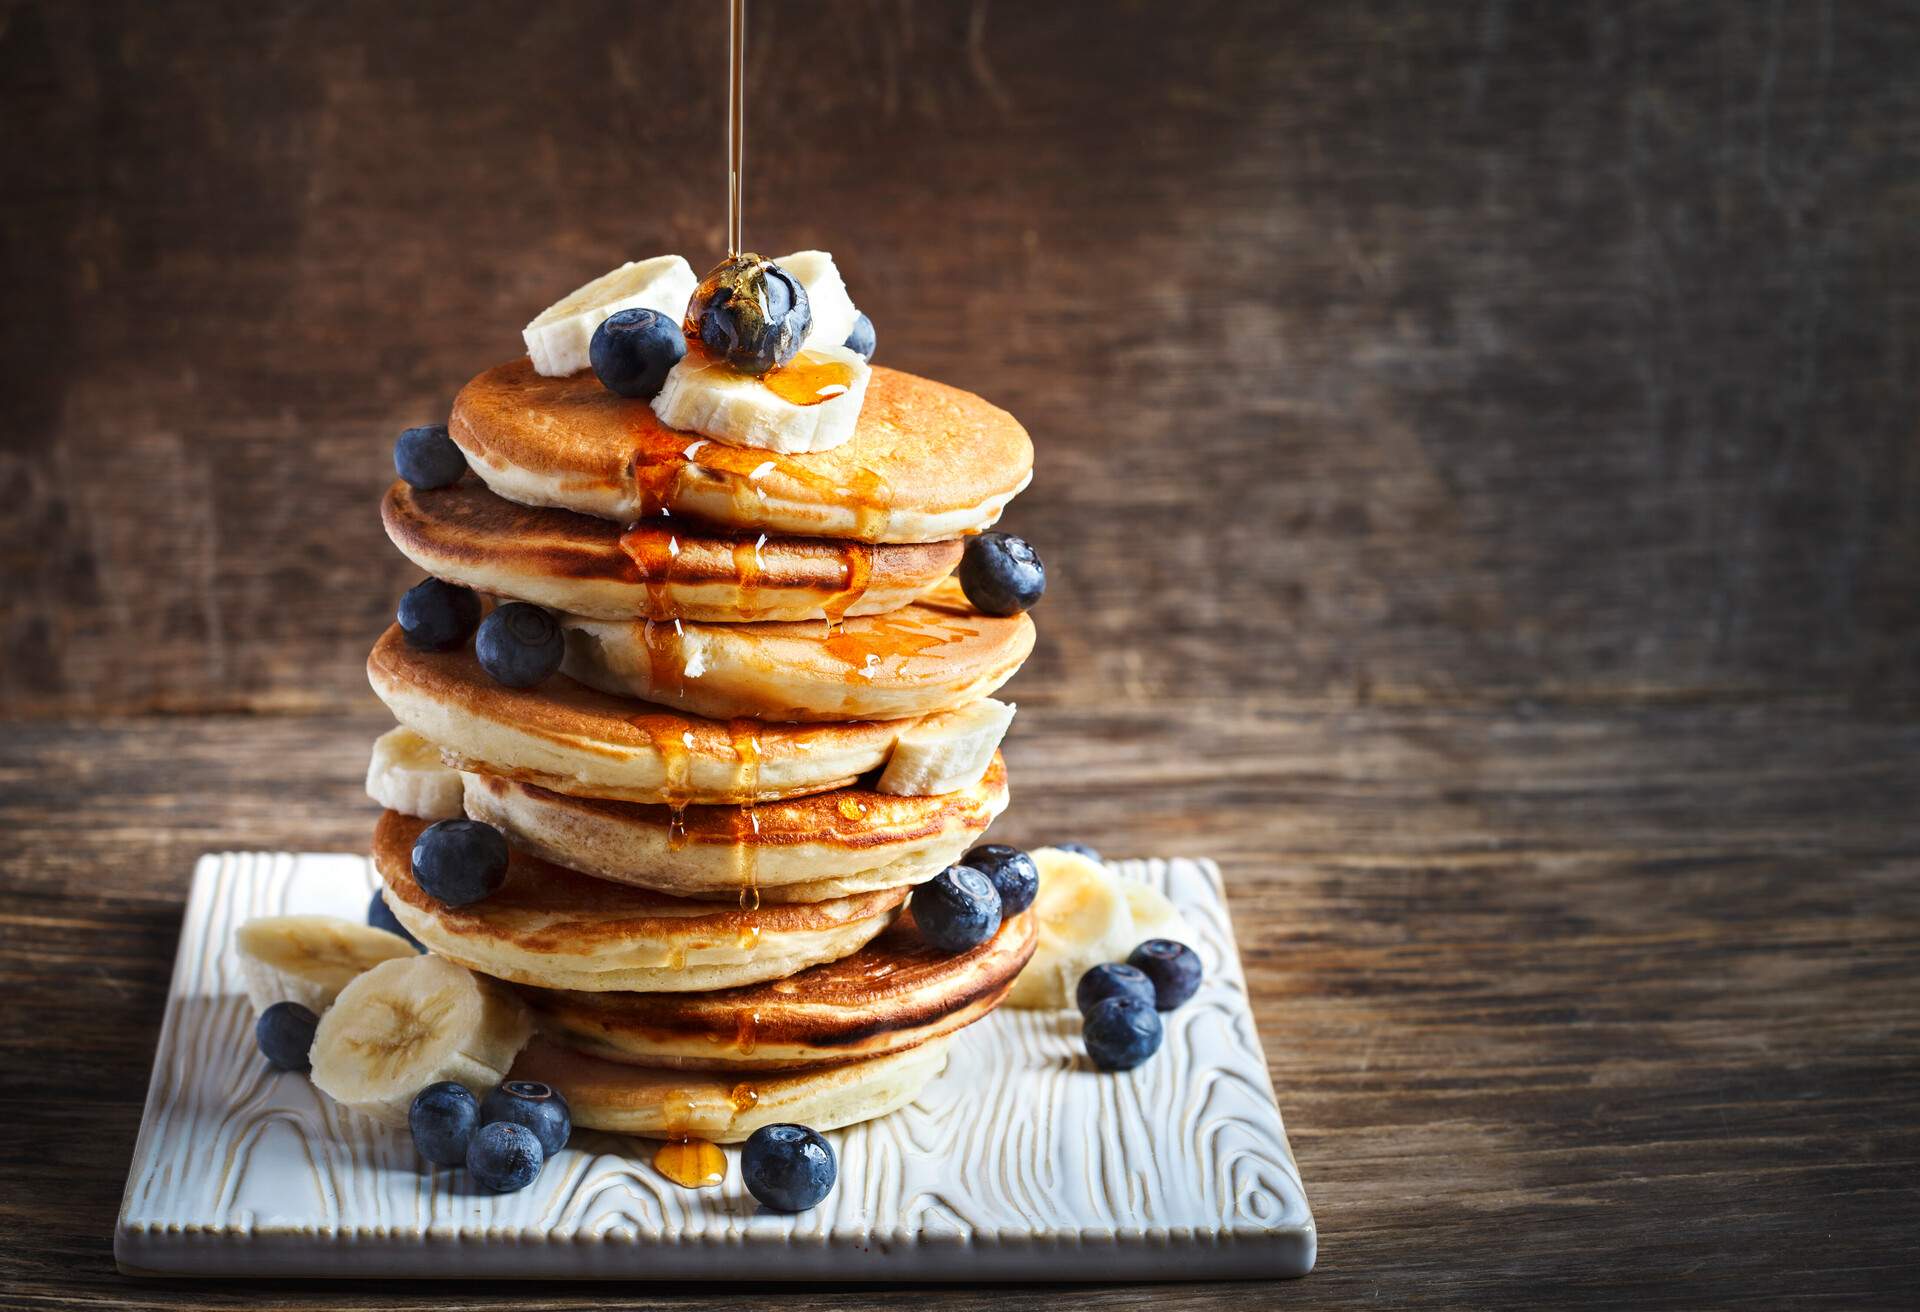 Pancakes with banana, blueberry and maple syrup for a breakfast, wooden background, copy space